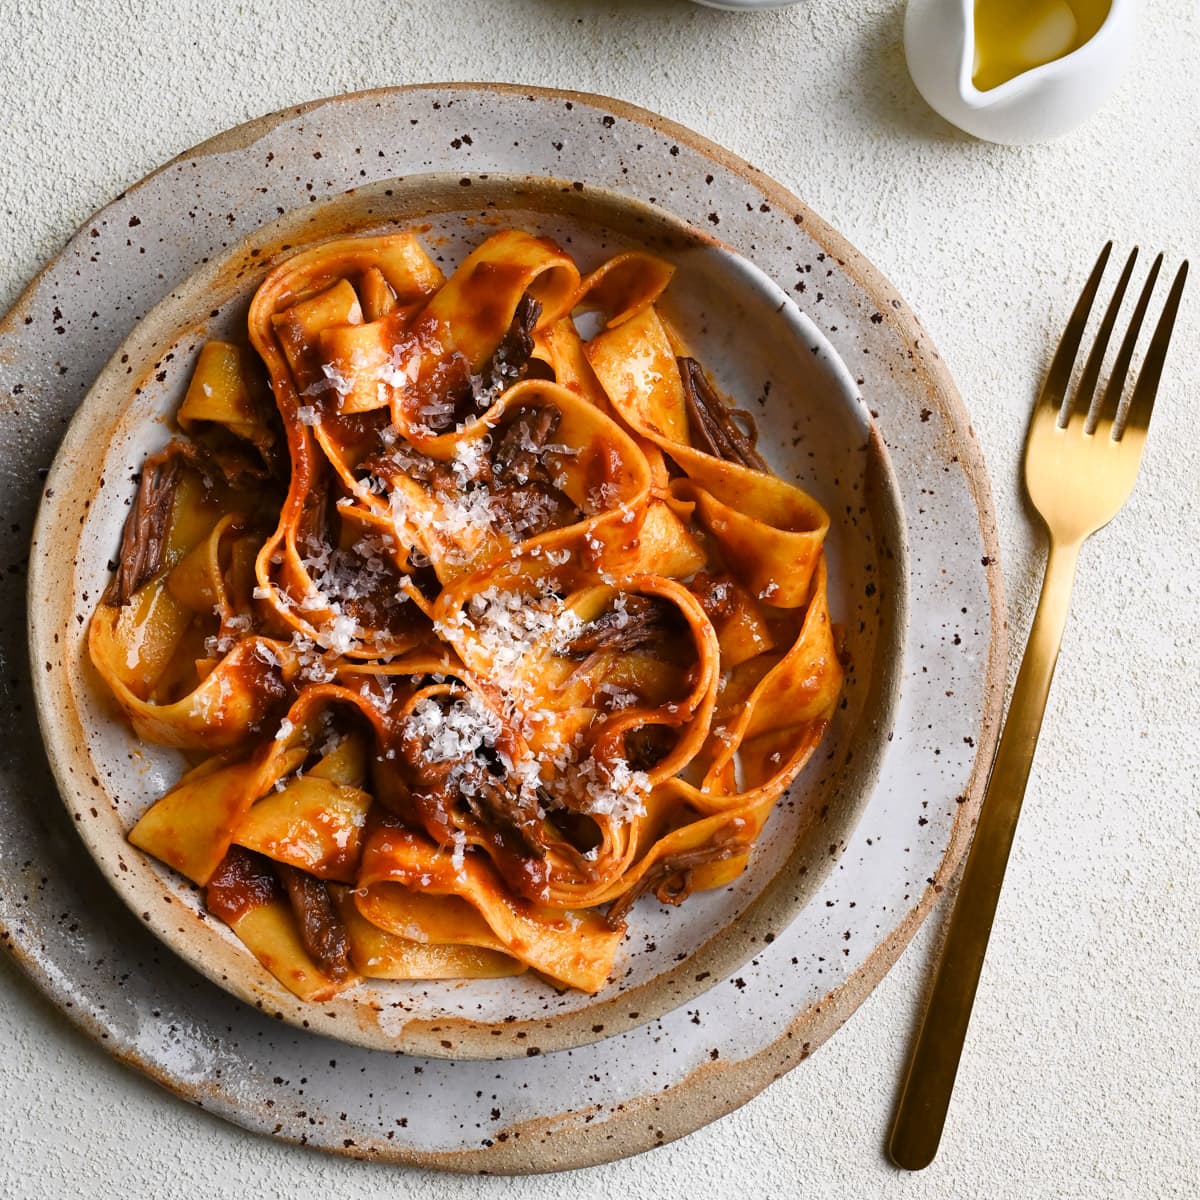 Homemade Pappardelle Pasta with Meat Ragu